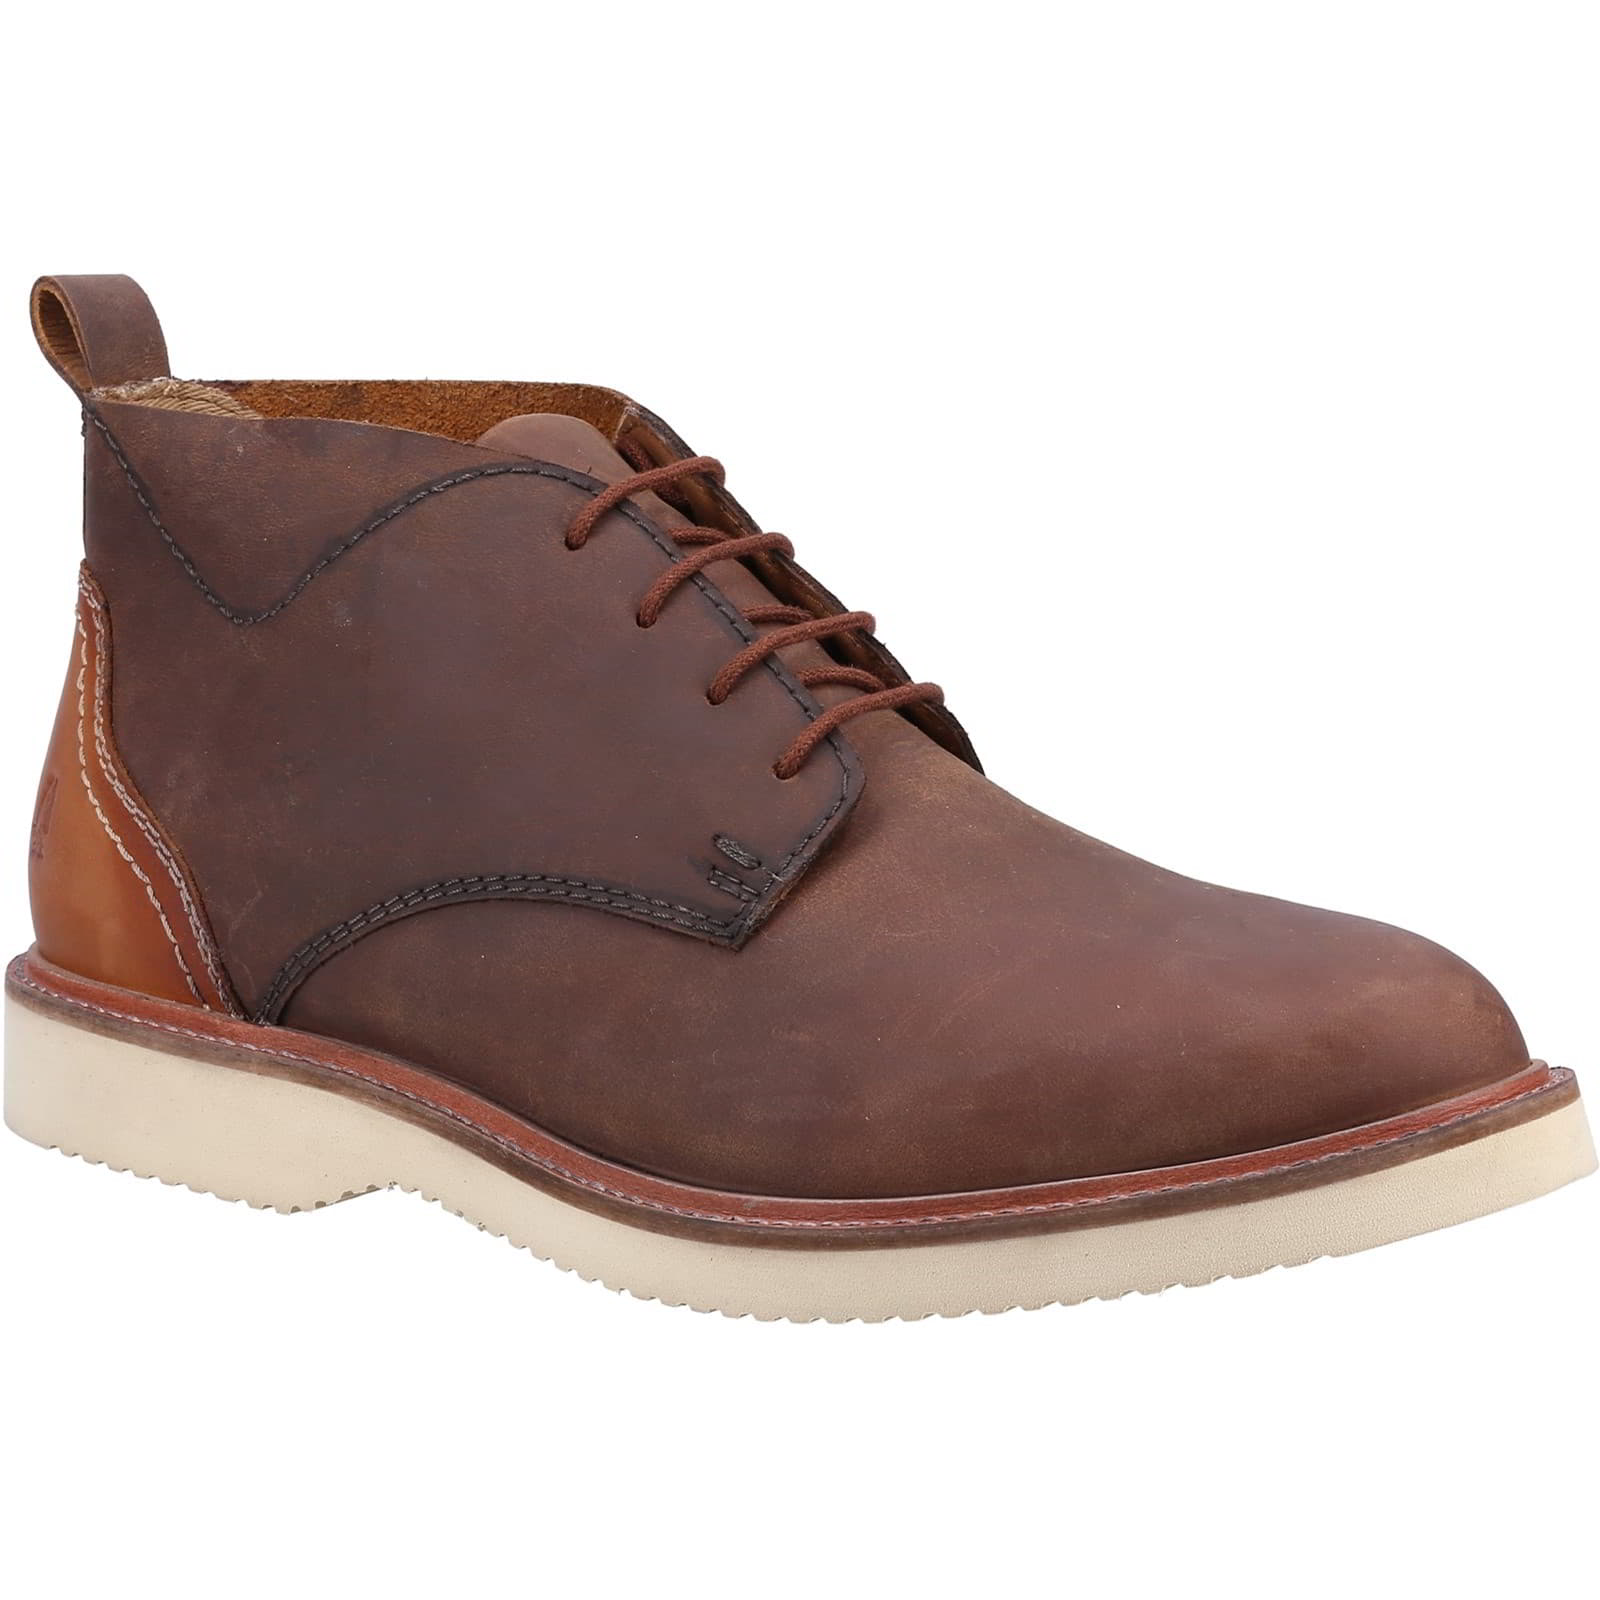 Hush Puppies Men's Wesley Lace UP Desert Chukka Ankle Boots - UK 6